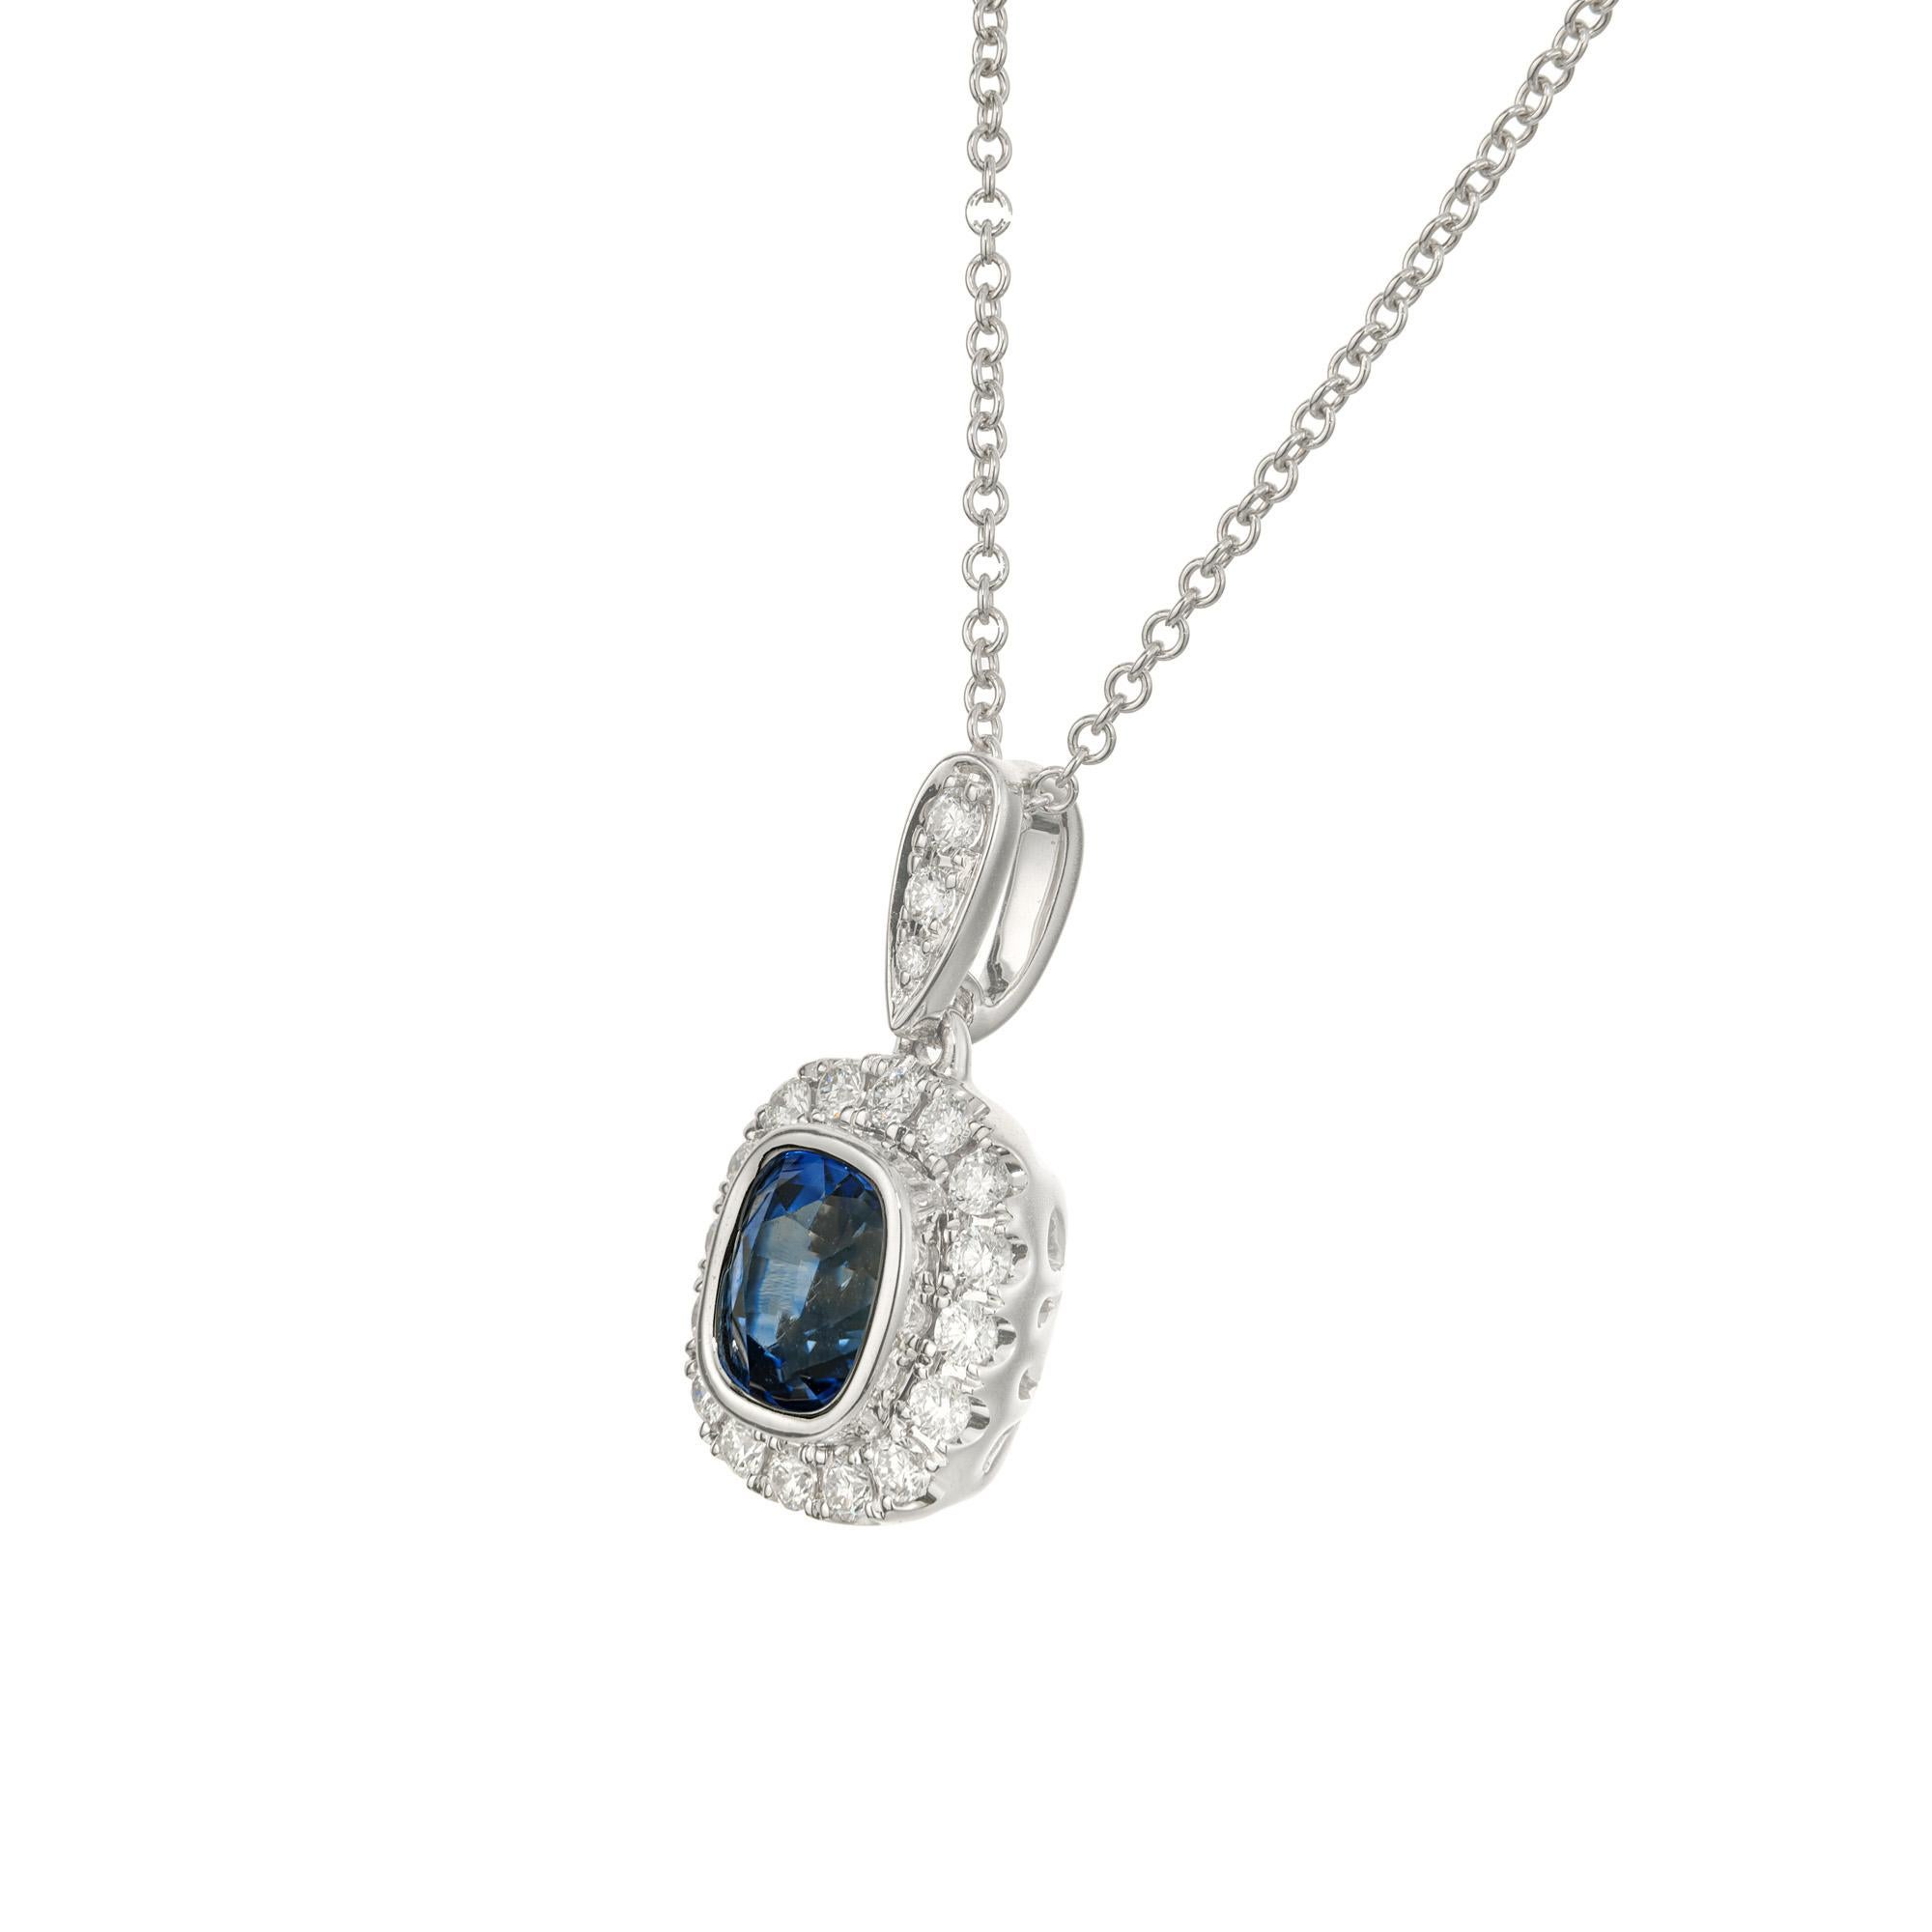 Peter Suchy 1.05 Carat Cushion Cut Sapphire Diamond White Gold Pendant Necklace  In New Condition For Sale In Stamford, CT